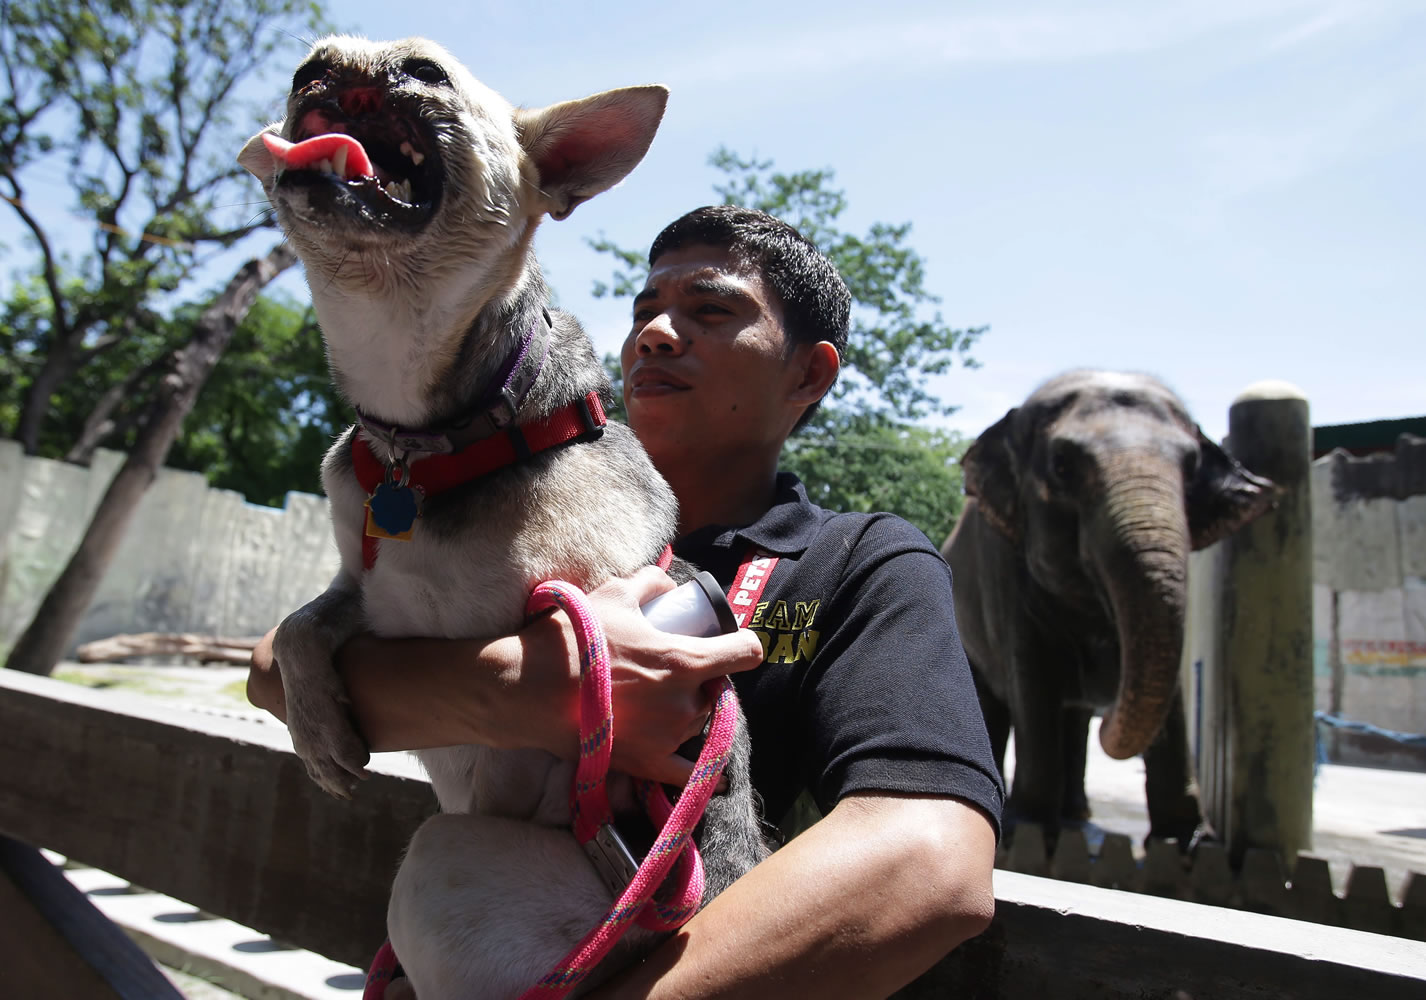 Kabang, a 2-year-old mixed breed, is held outside the quarters of an elephant named Mali during a visit at Manila's Zoo in the Philippines on Sunday.